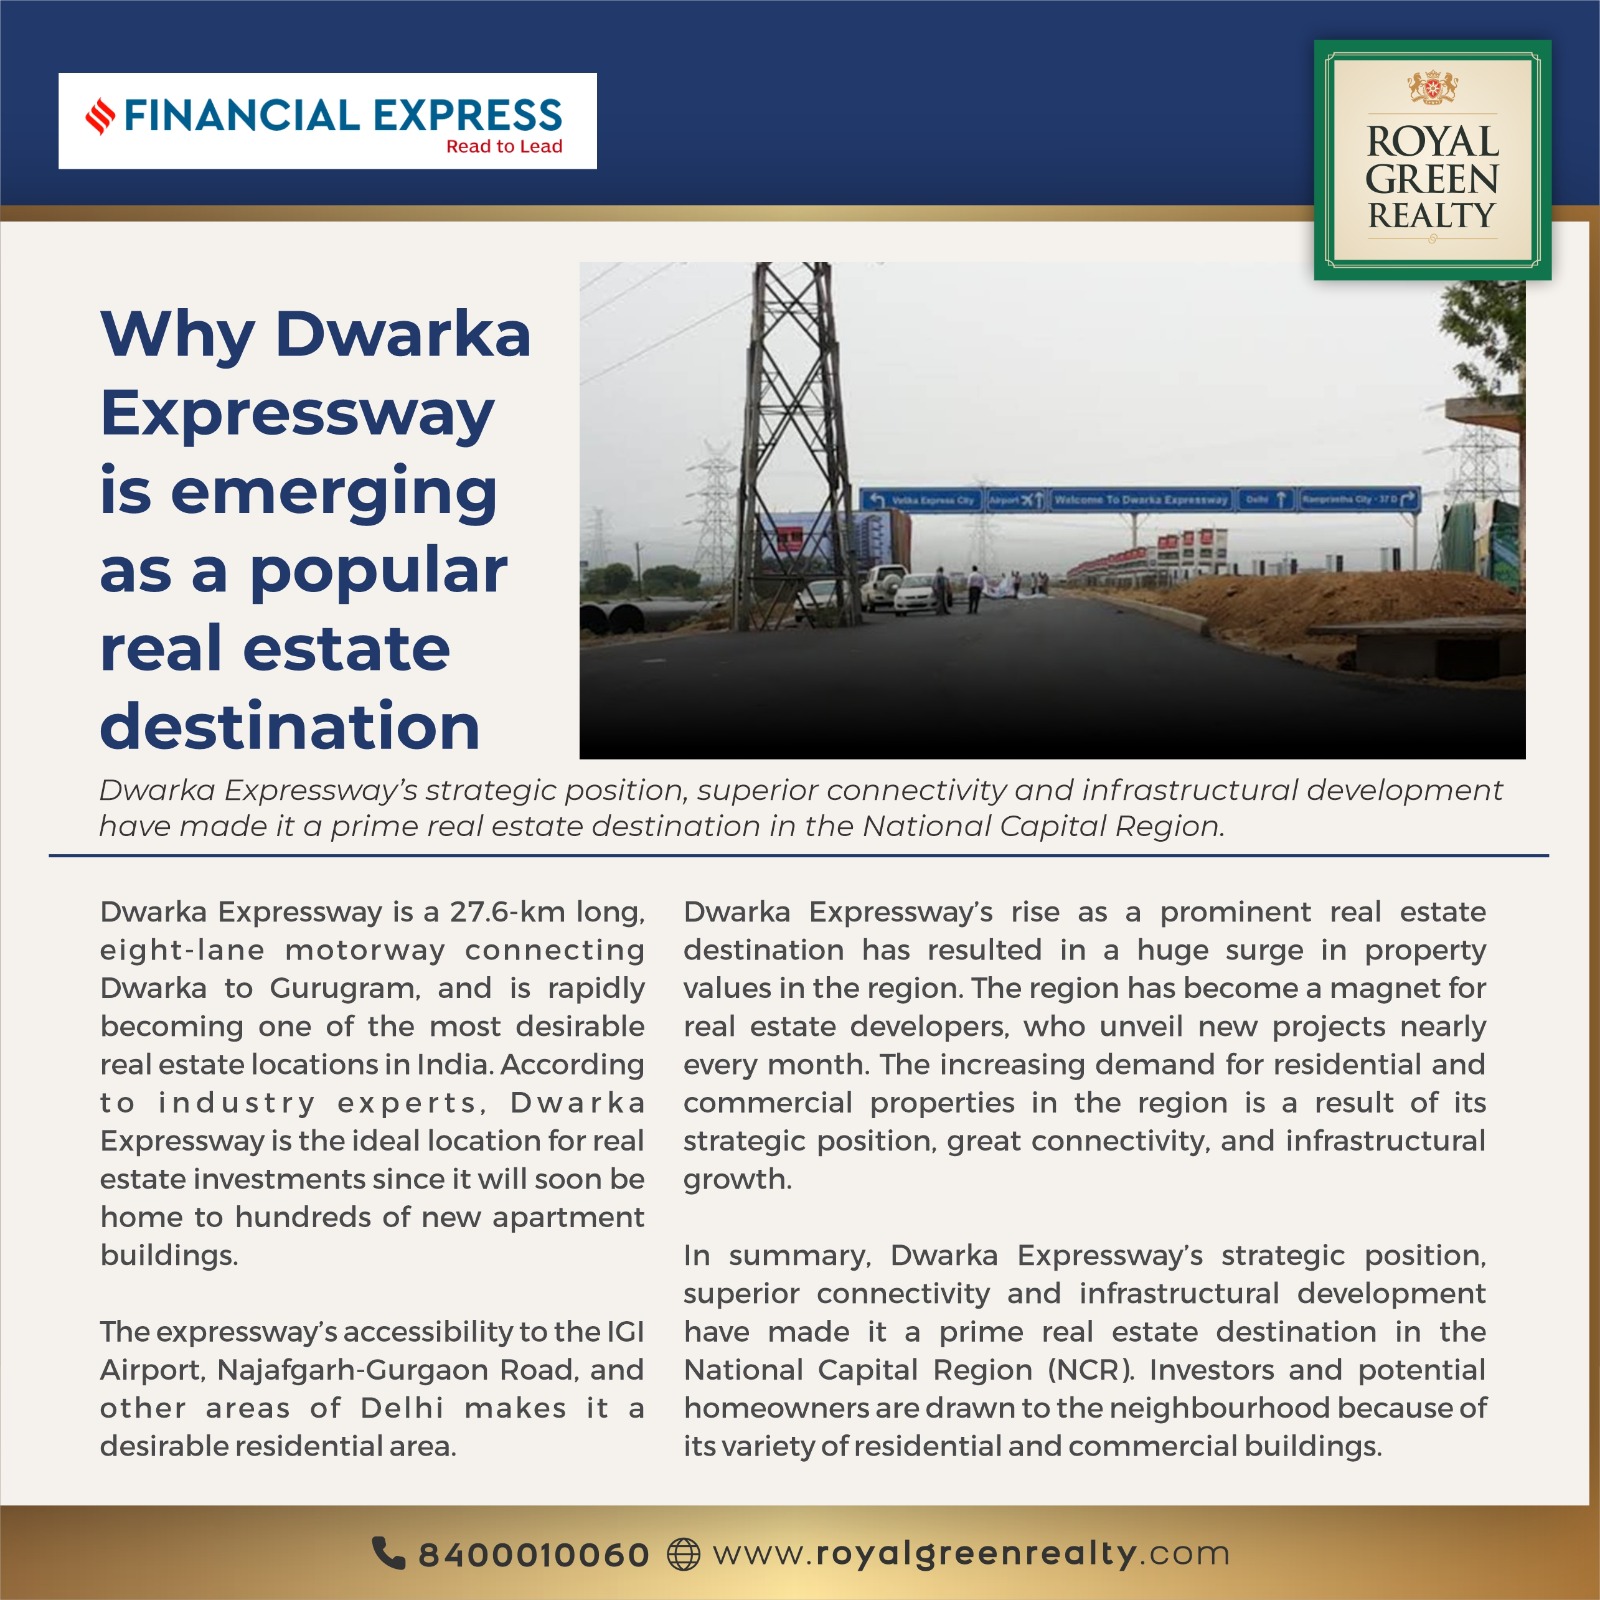 Why Dwarka Expressway is emerging as a popularreal estate destination